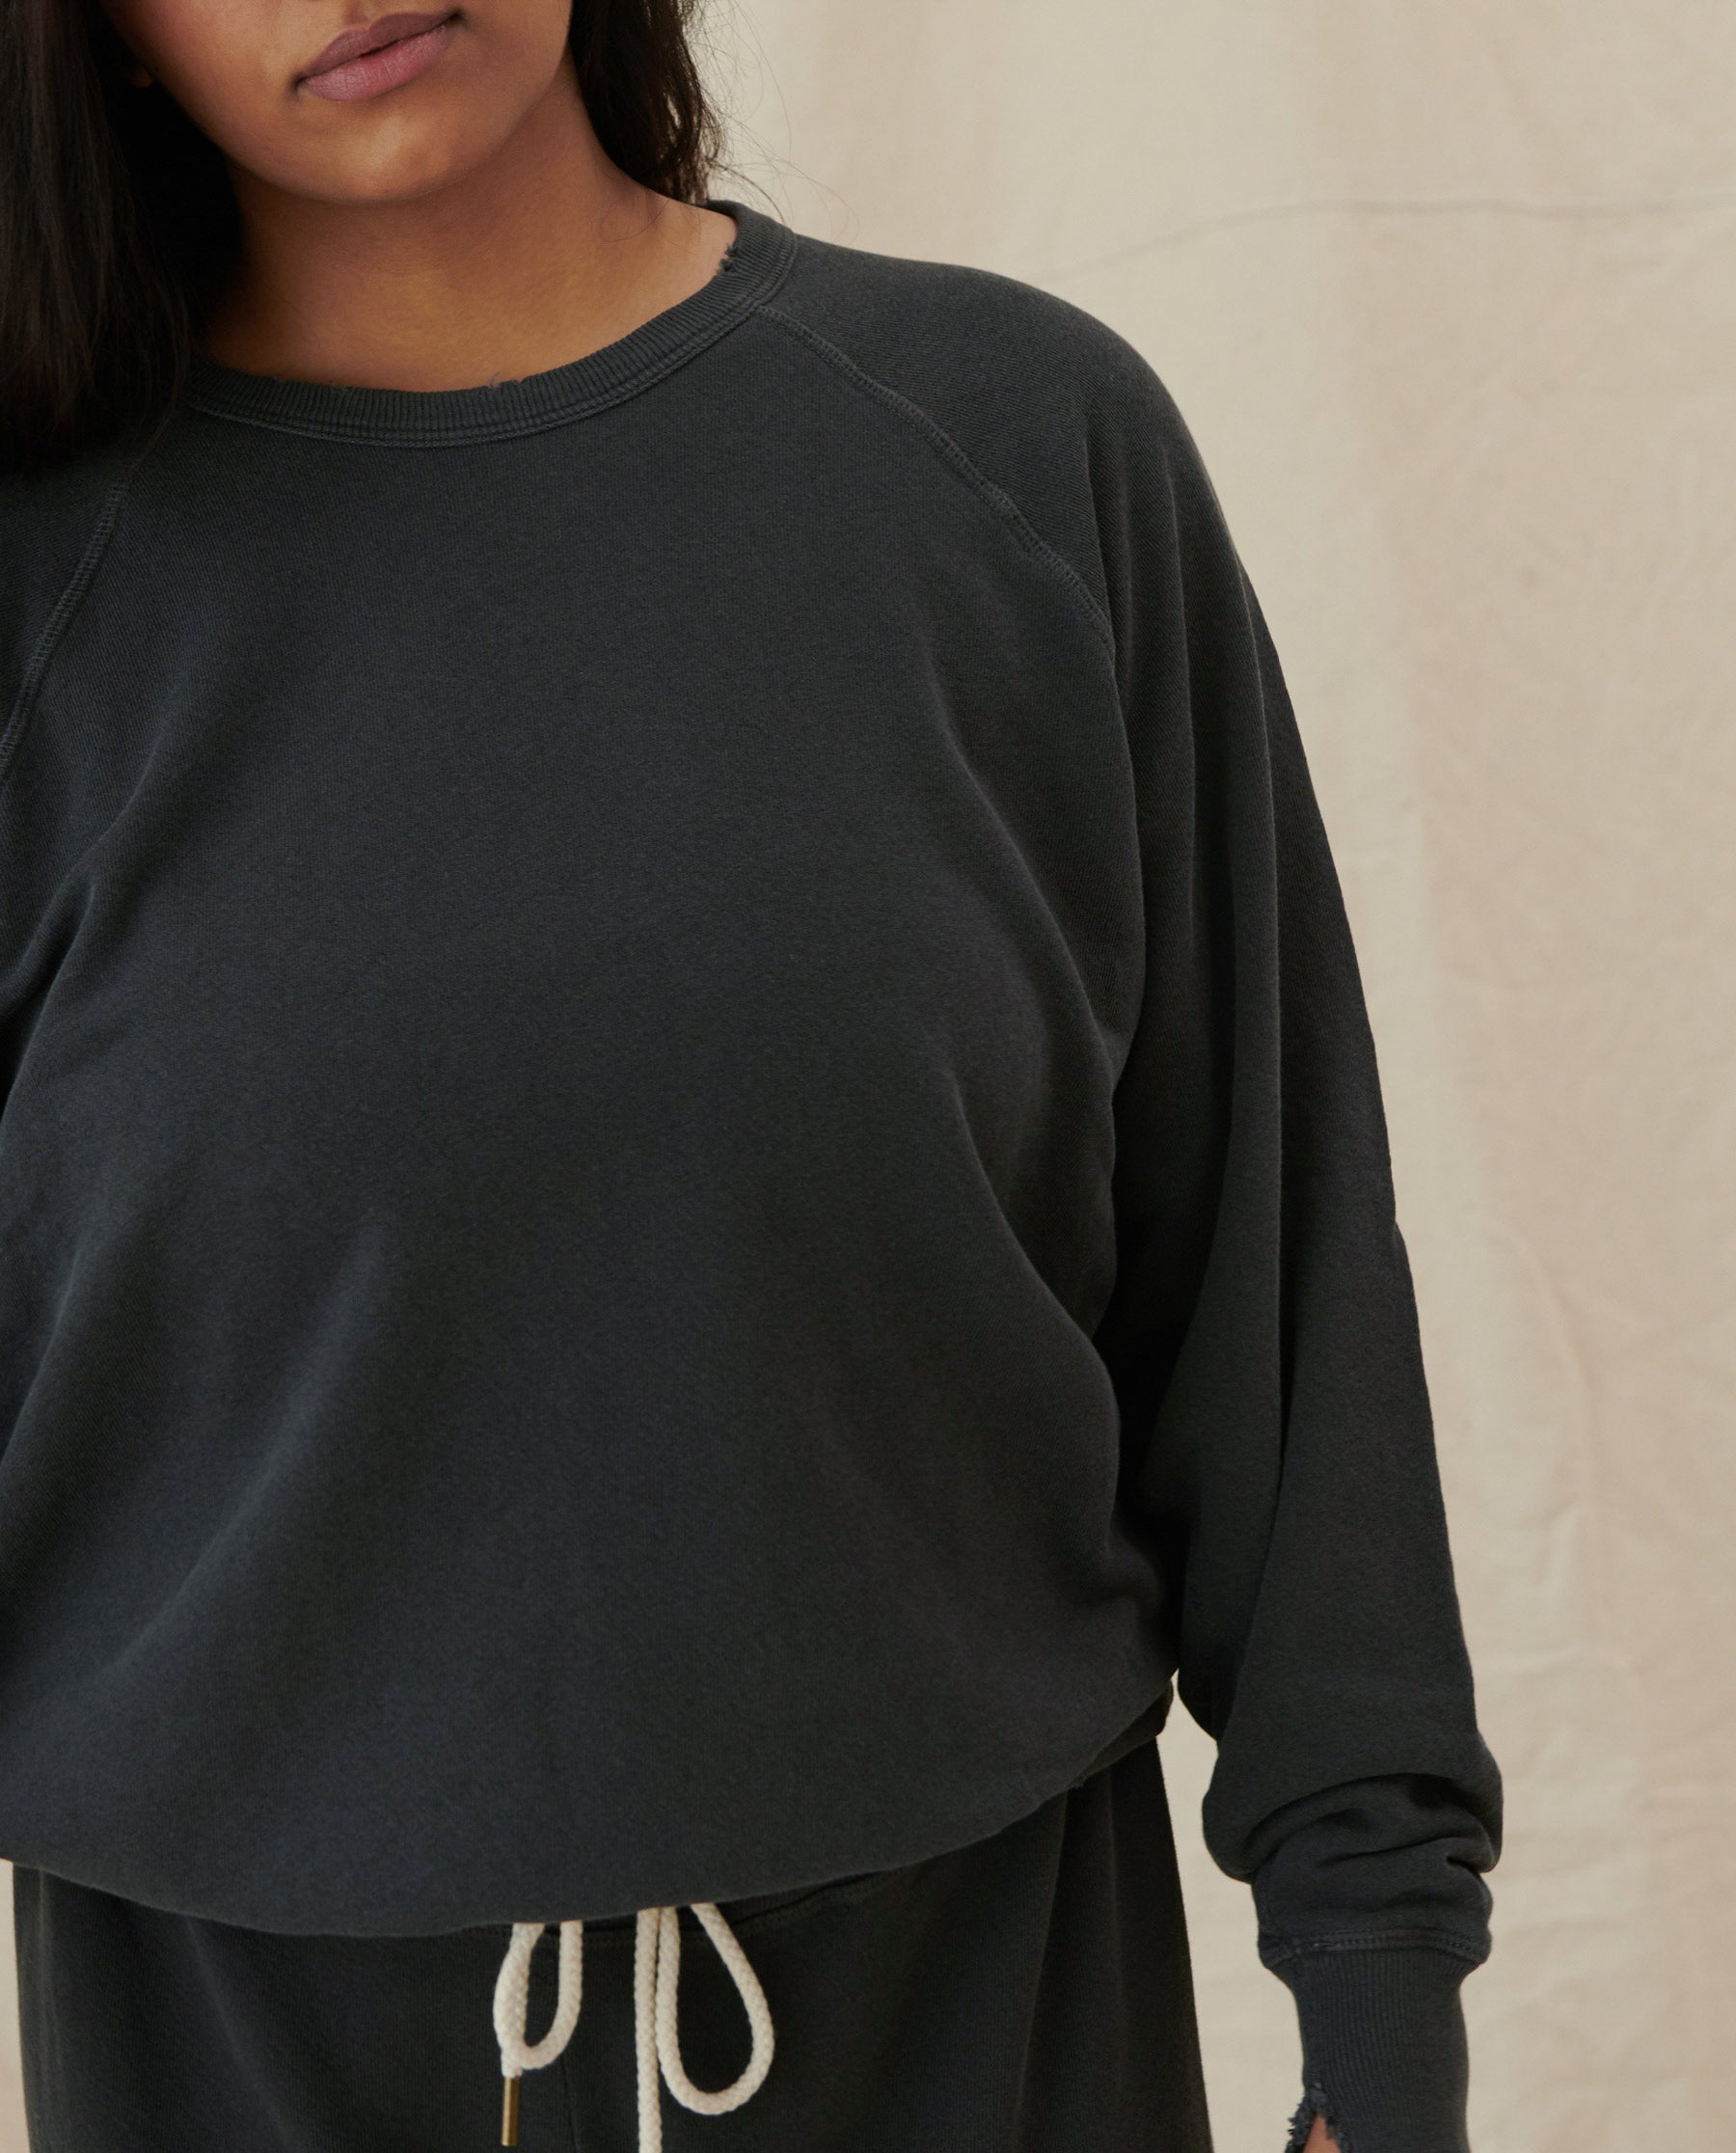 The College Sweatshirt. Solid -- Washed Black SWEATSHIRTS THE GREAT. CORE KNITS